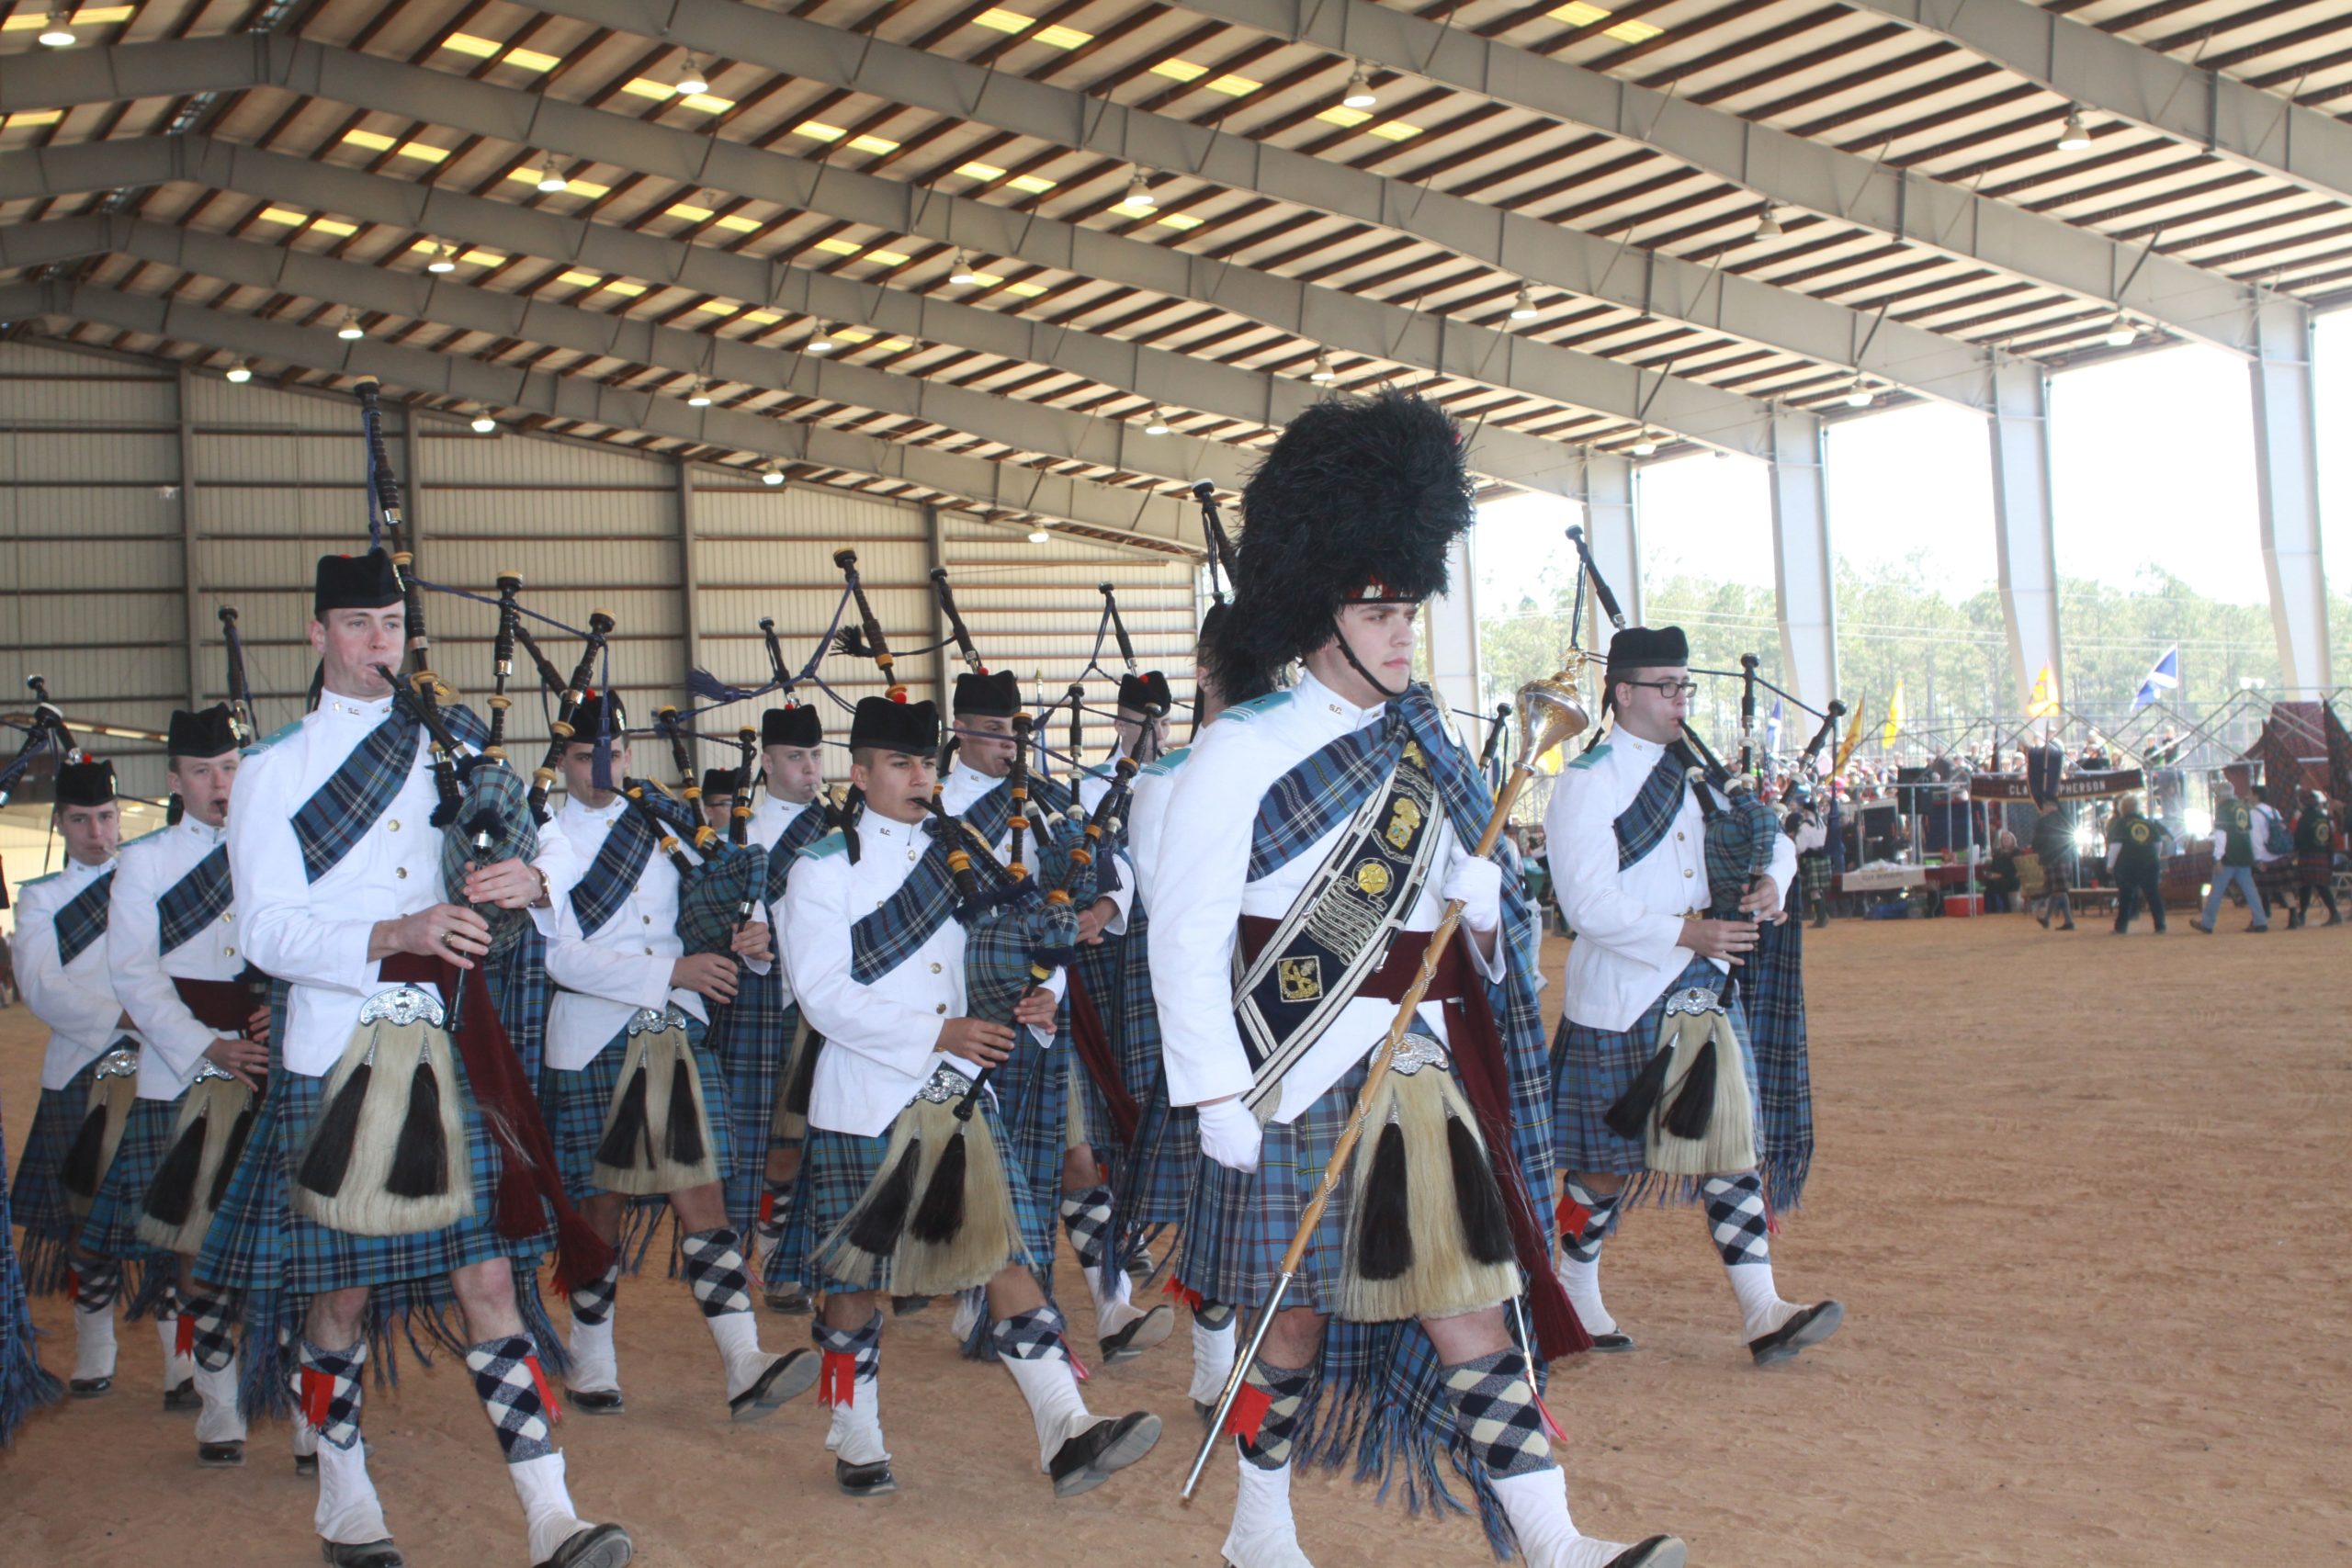 Marching Band at The Northeast Florida Scottish Highland Games and Festival